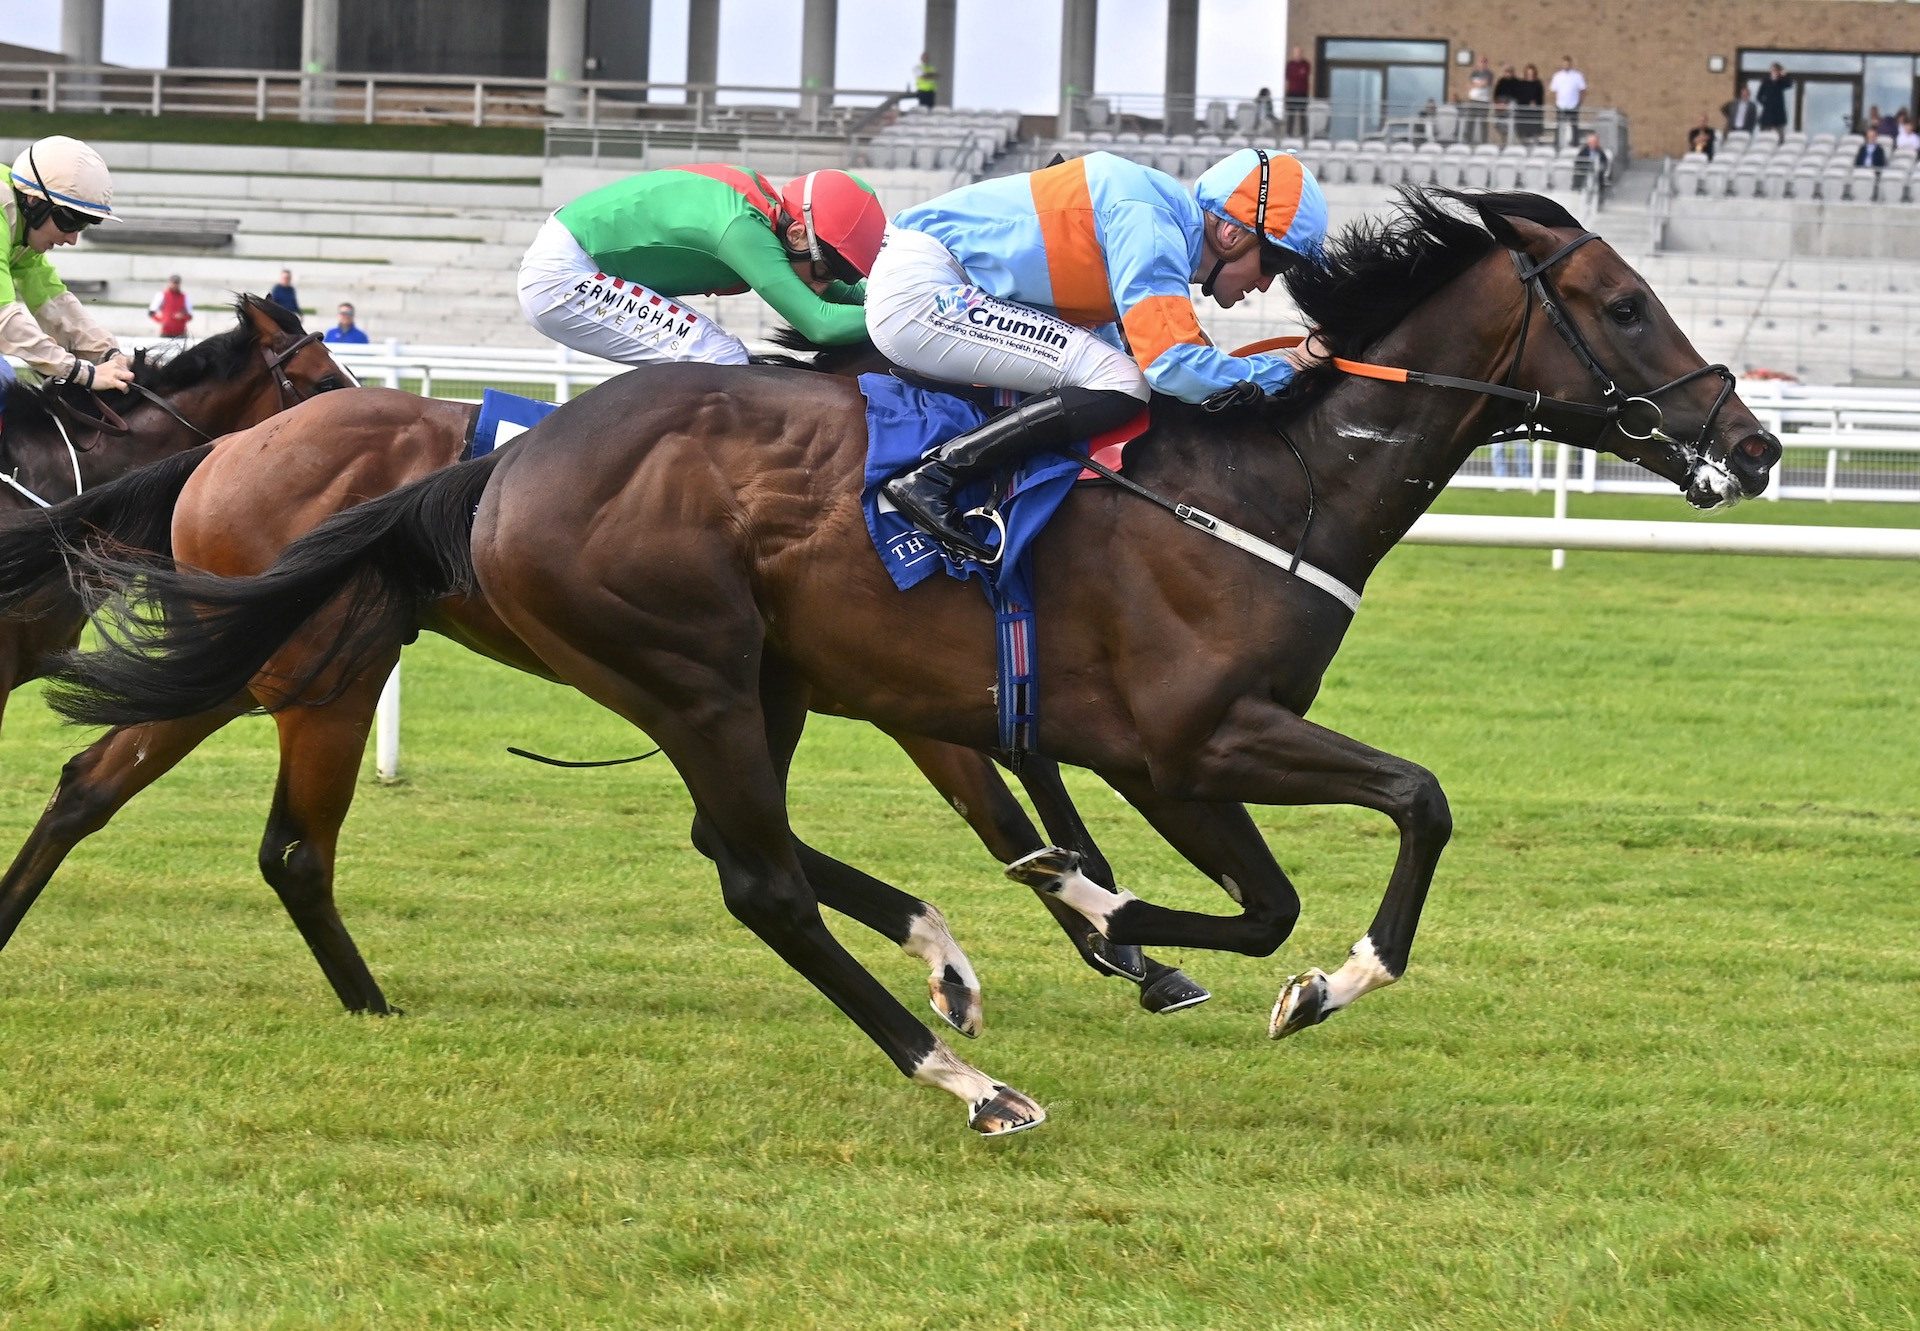 Letsbefrankaboutit (Sioux Nation) Wins The Group 3 Round Tower Stakes at the Curragh